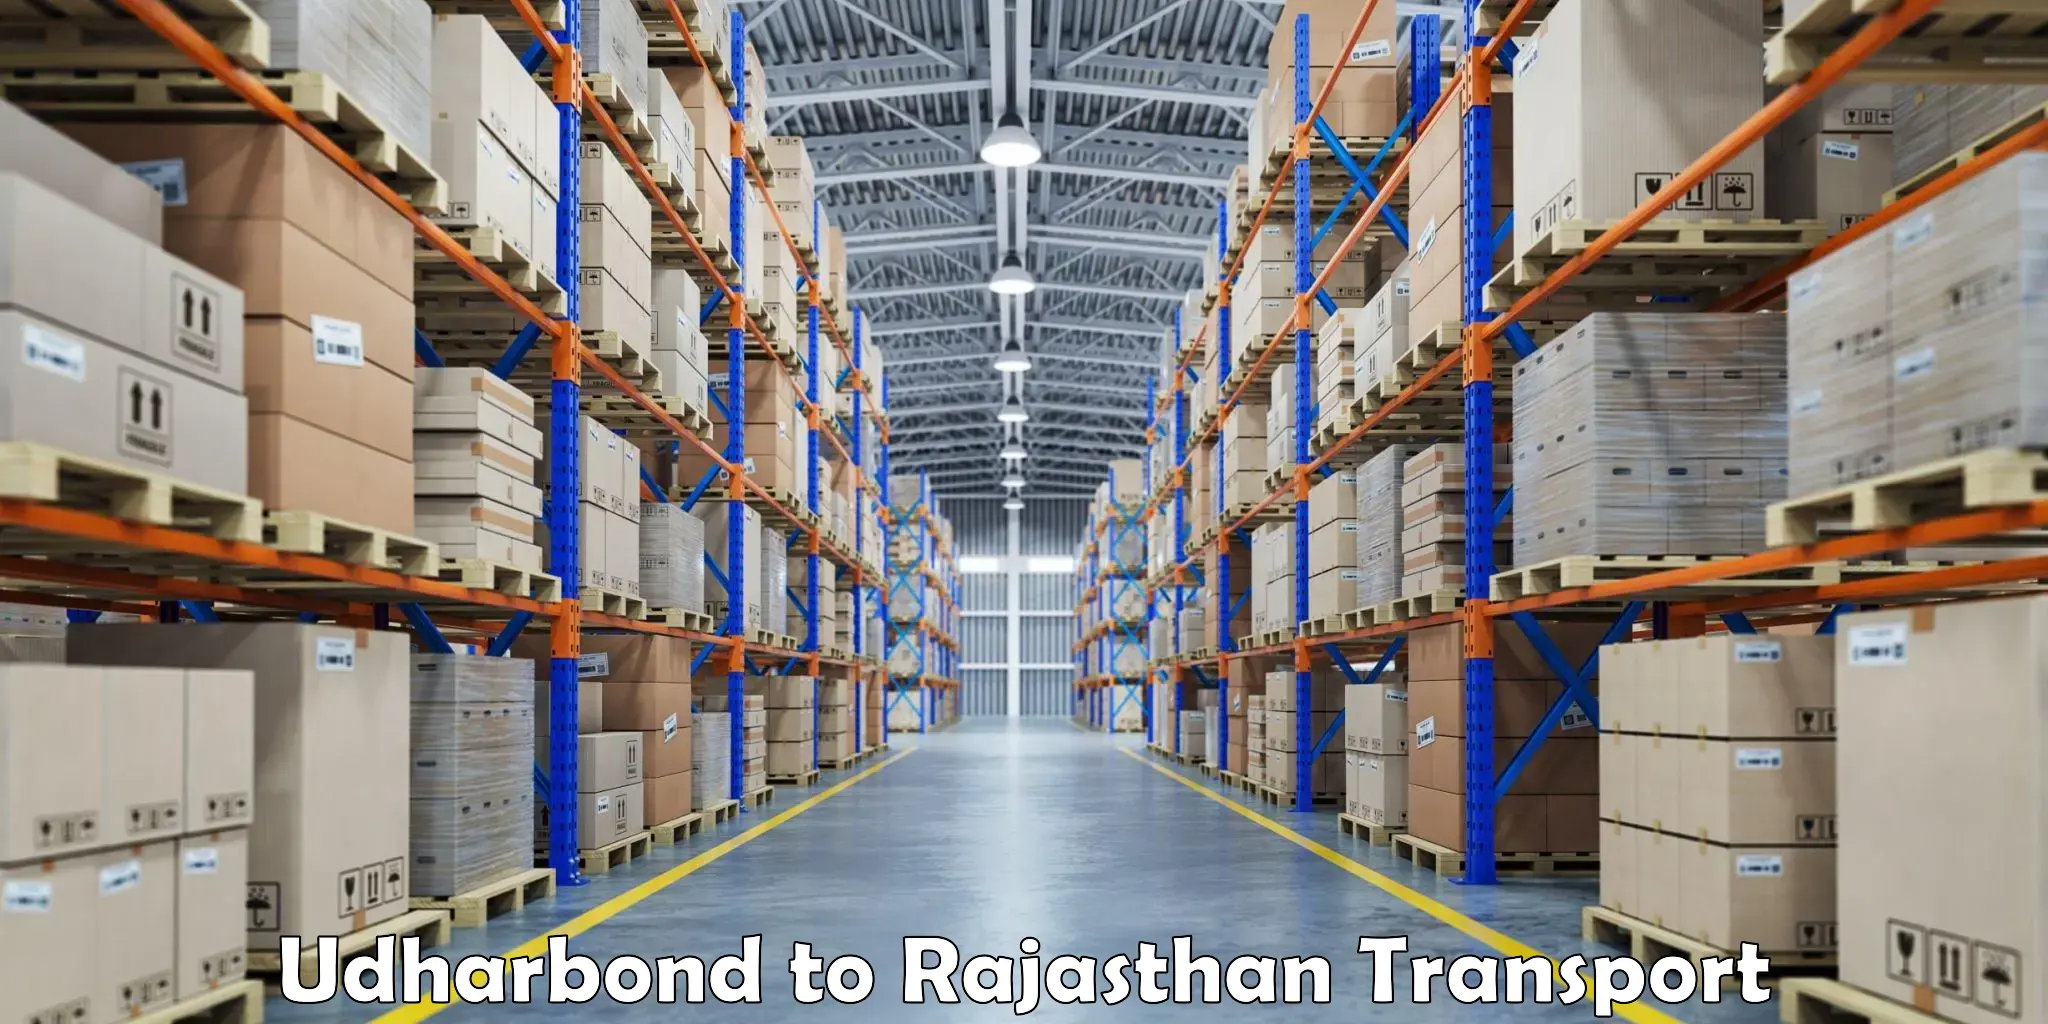 Air freight transport services Udharbond to Jodhpur